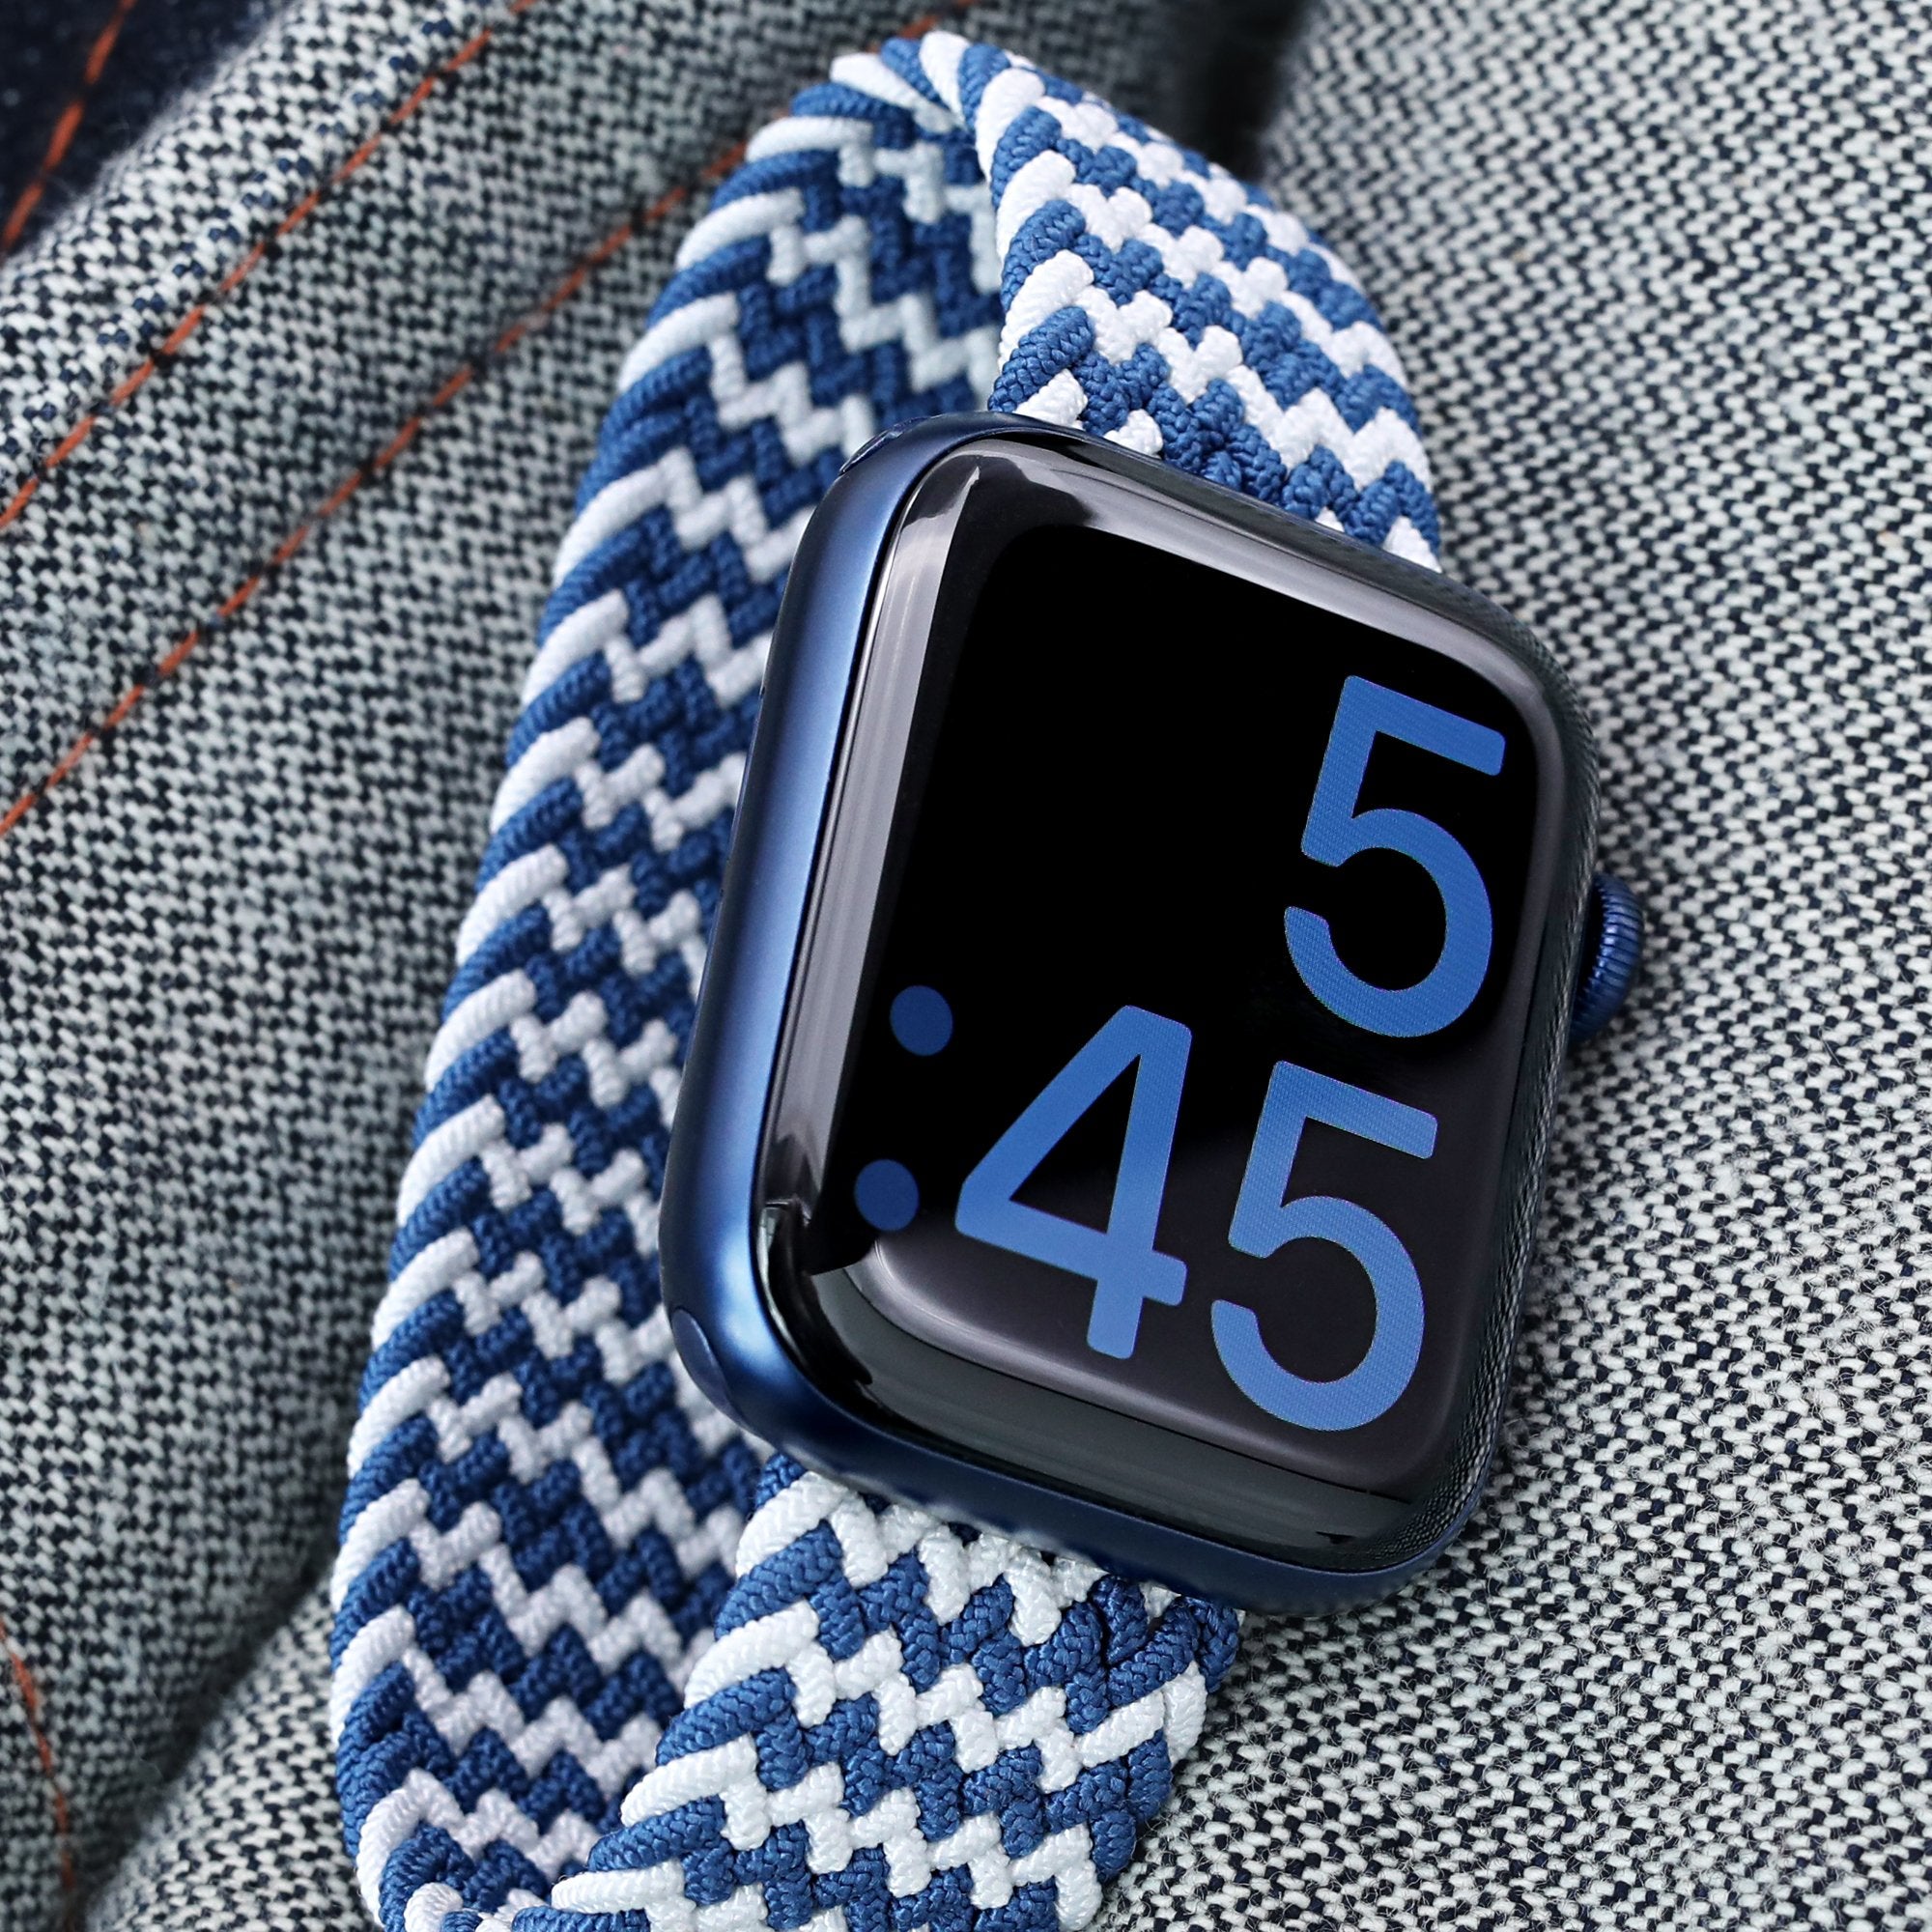 Apple Watch Series 6 Silver Aluminium Case With Braided Solo Loop (44mm)